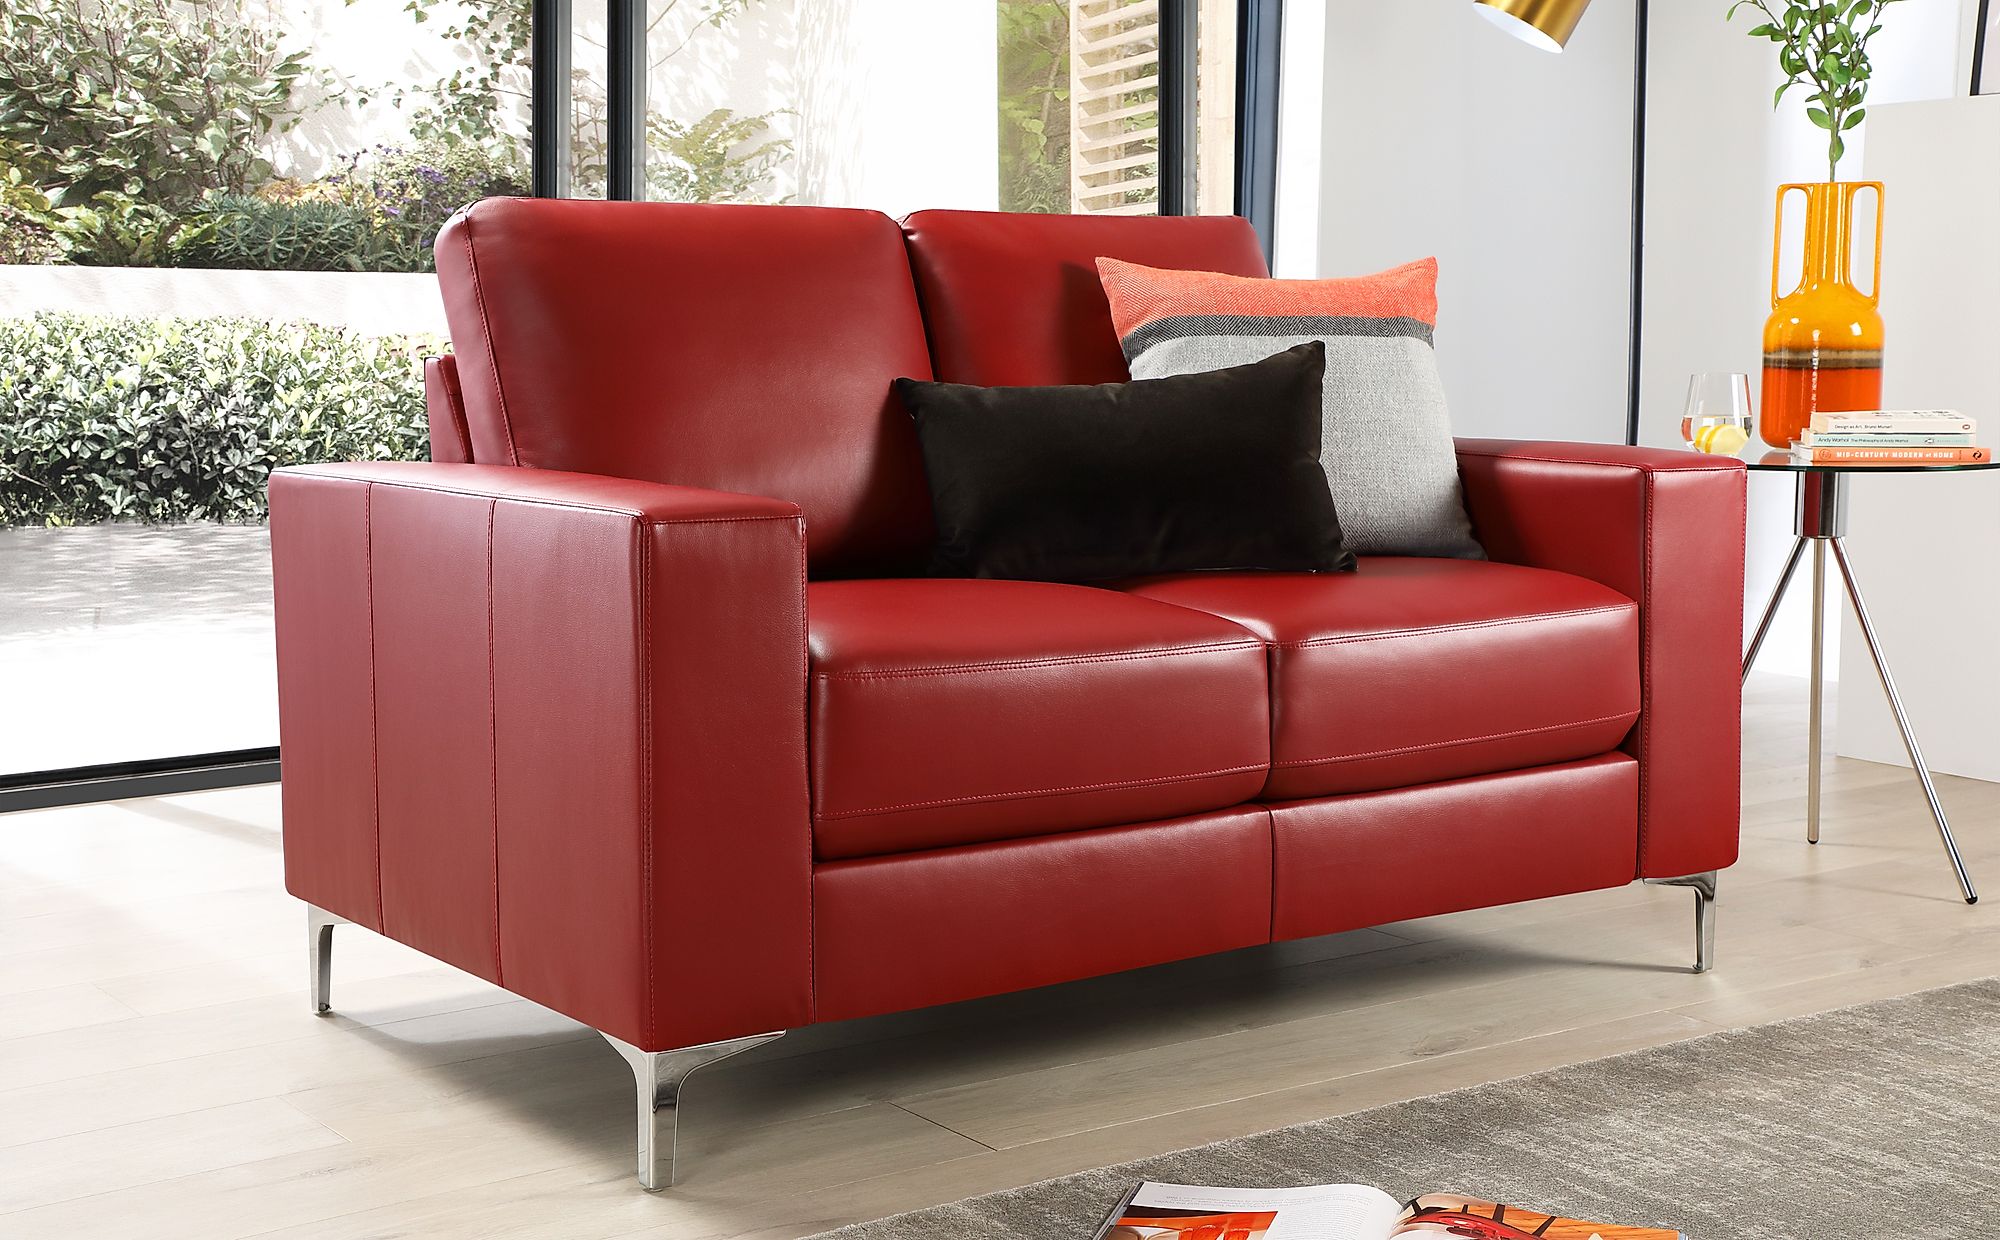 small red leather sofa